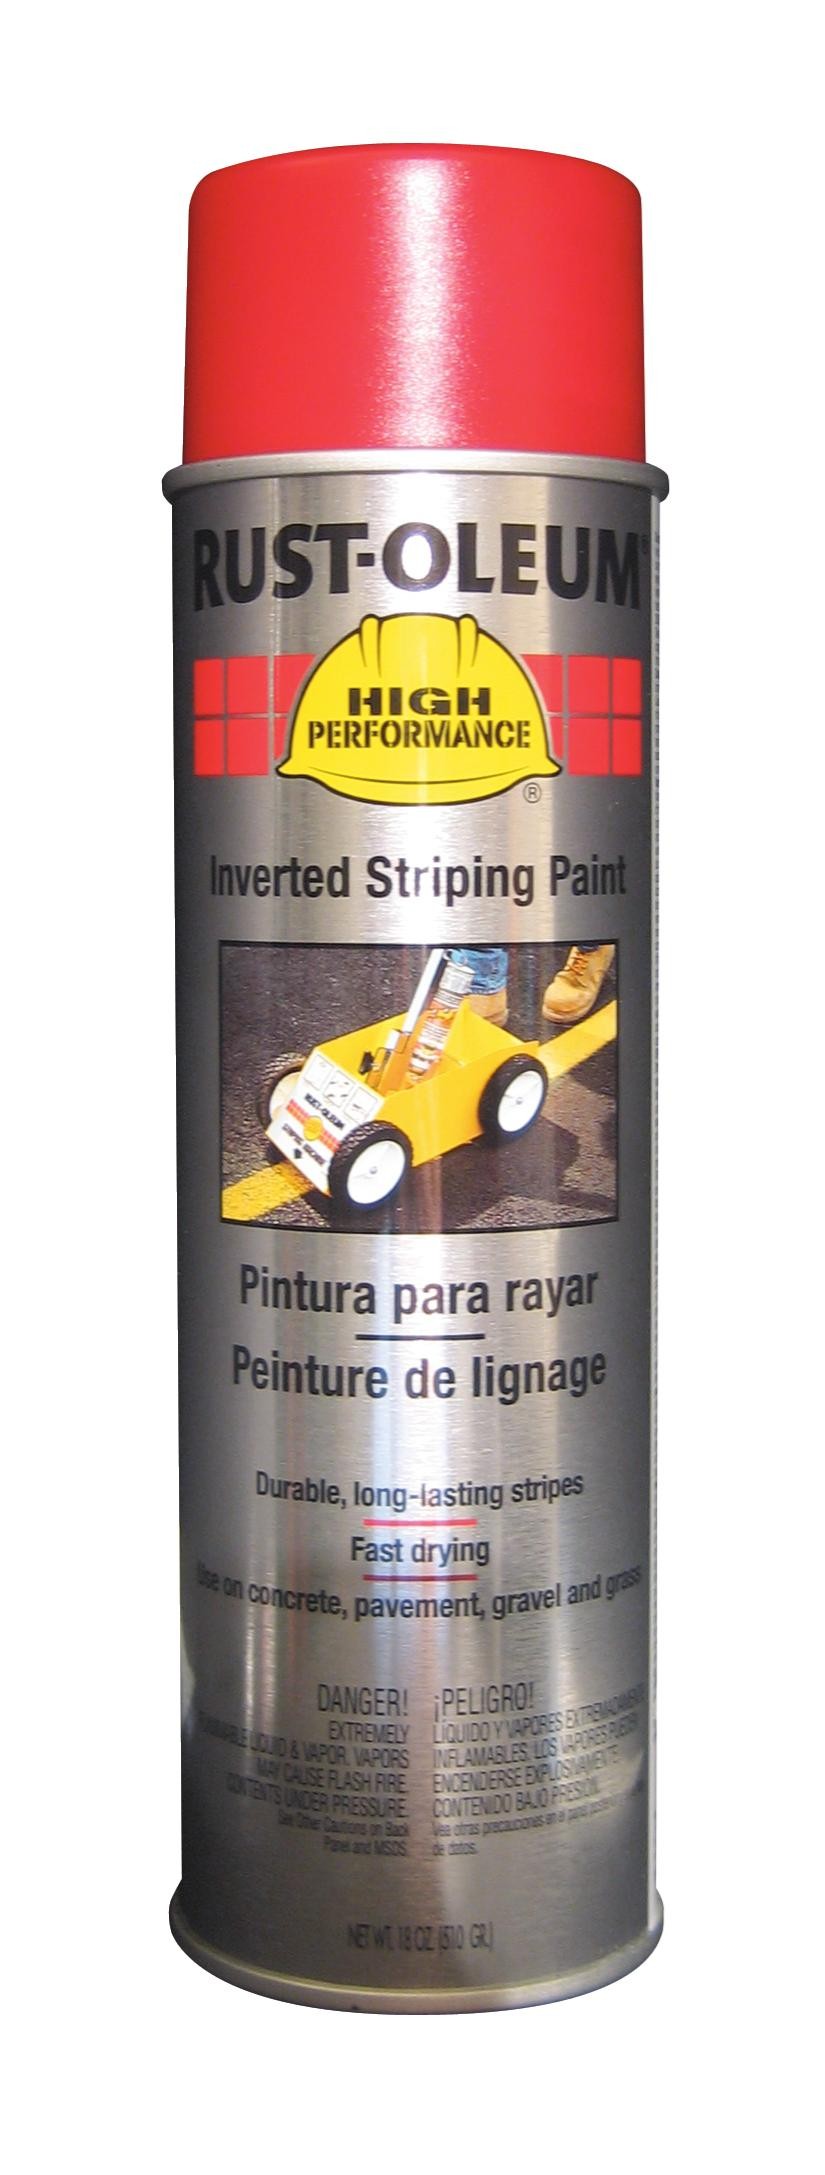 High Performance - V2300 System Inverted Marking Paint